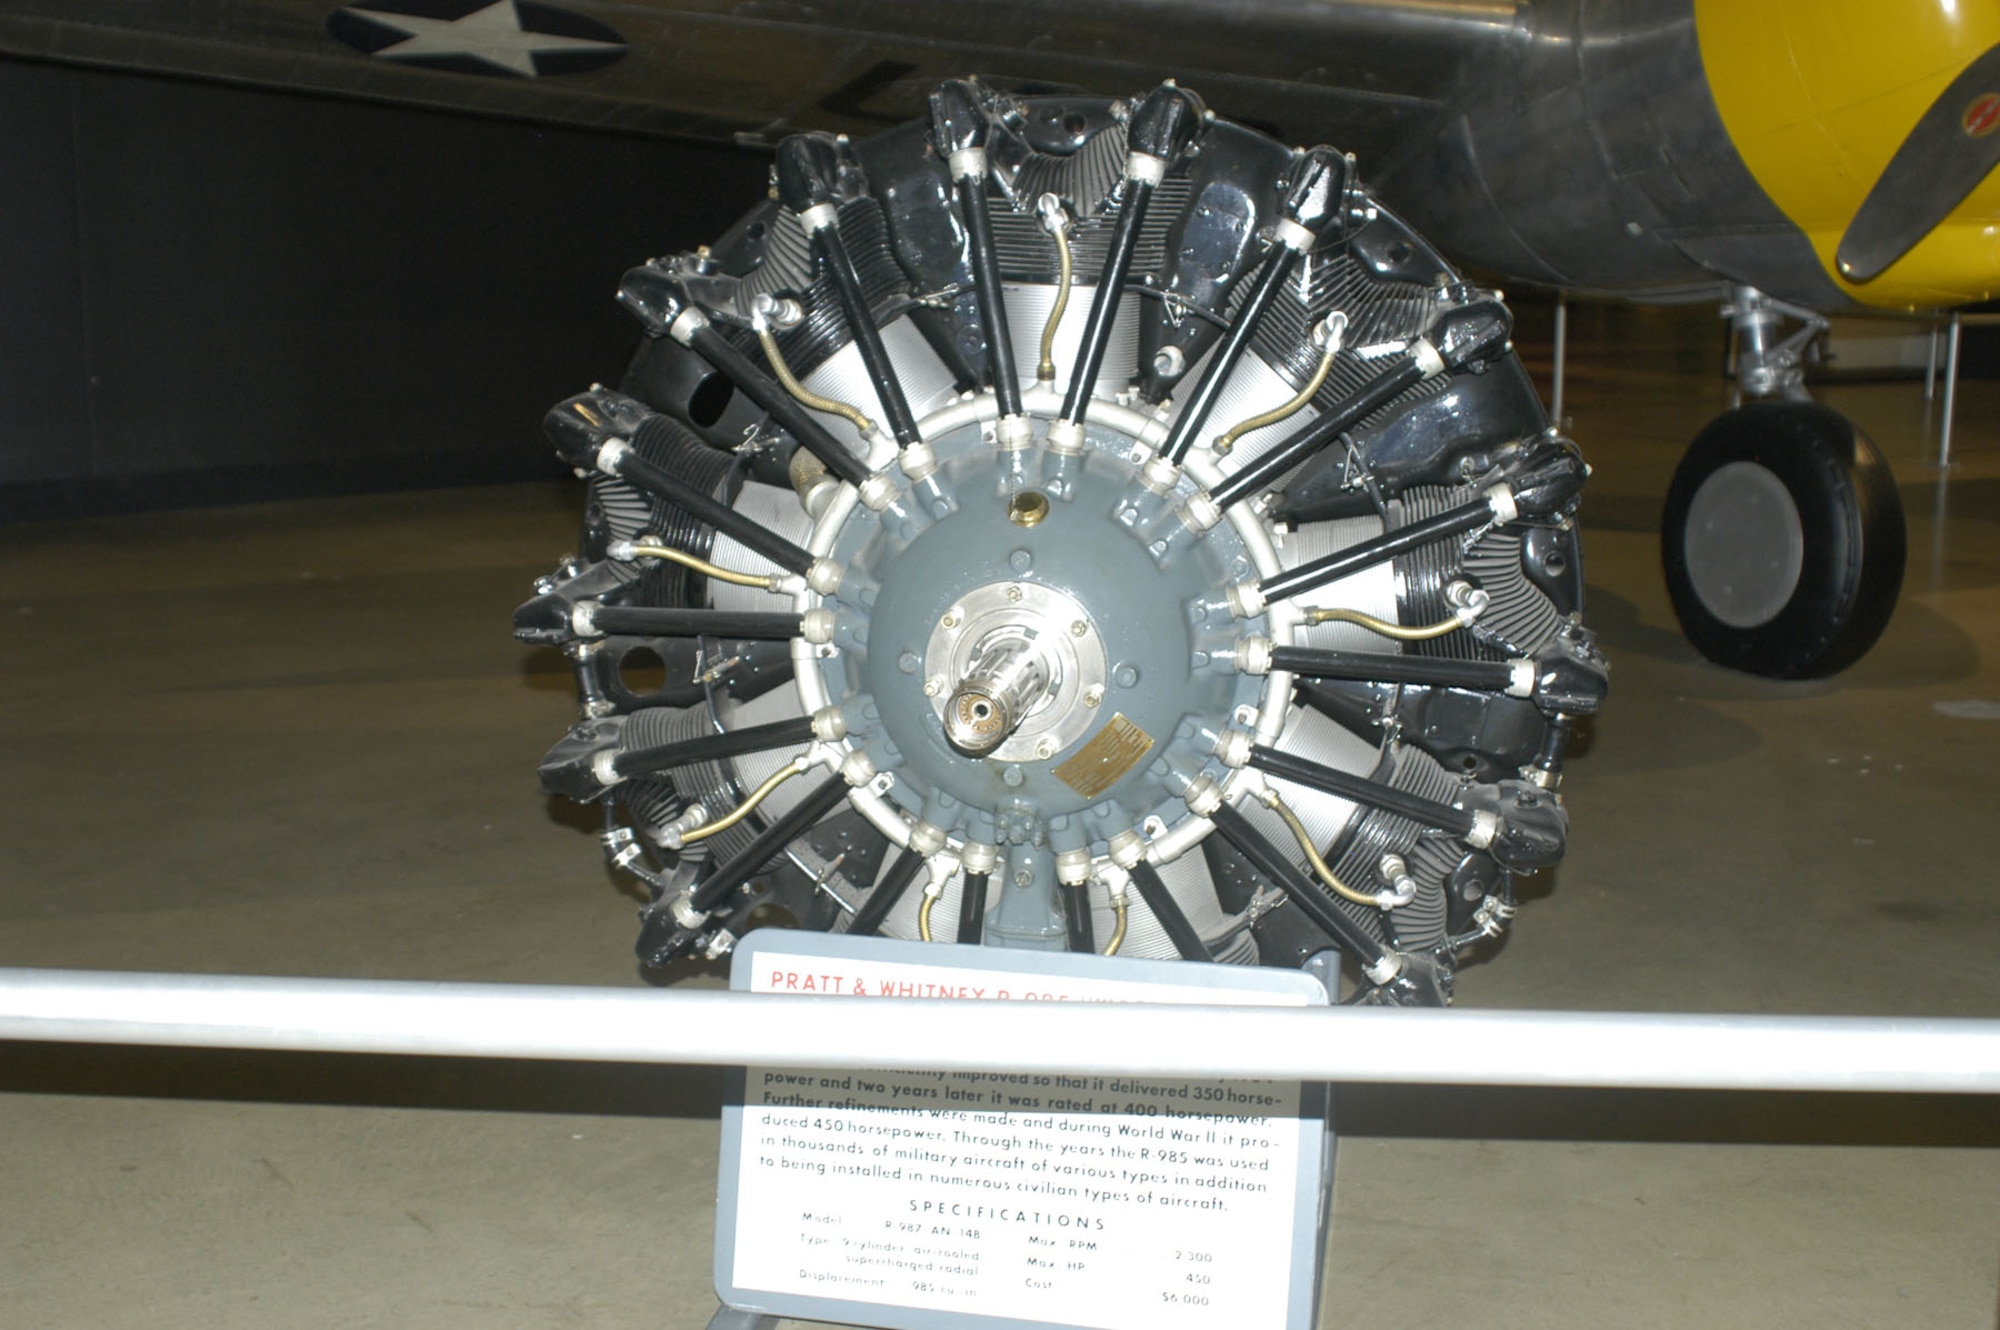 DAYTON, Ohio -- Pratt & Whitney R-985 on display in the World War II Gallery at the National Museum of the United States Air Force. (U.S. Air Force photo)